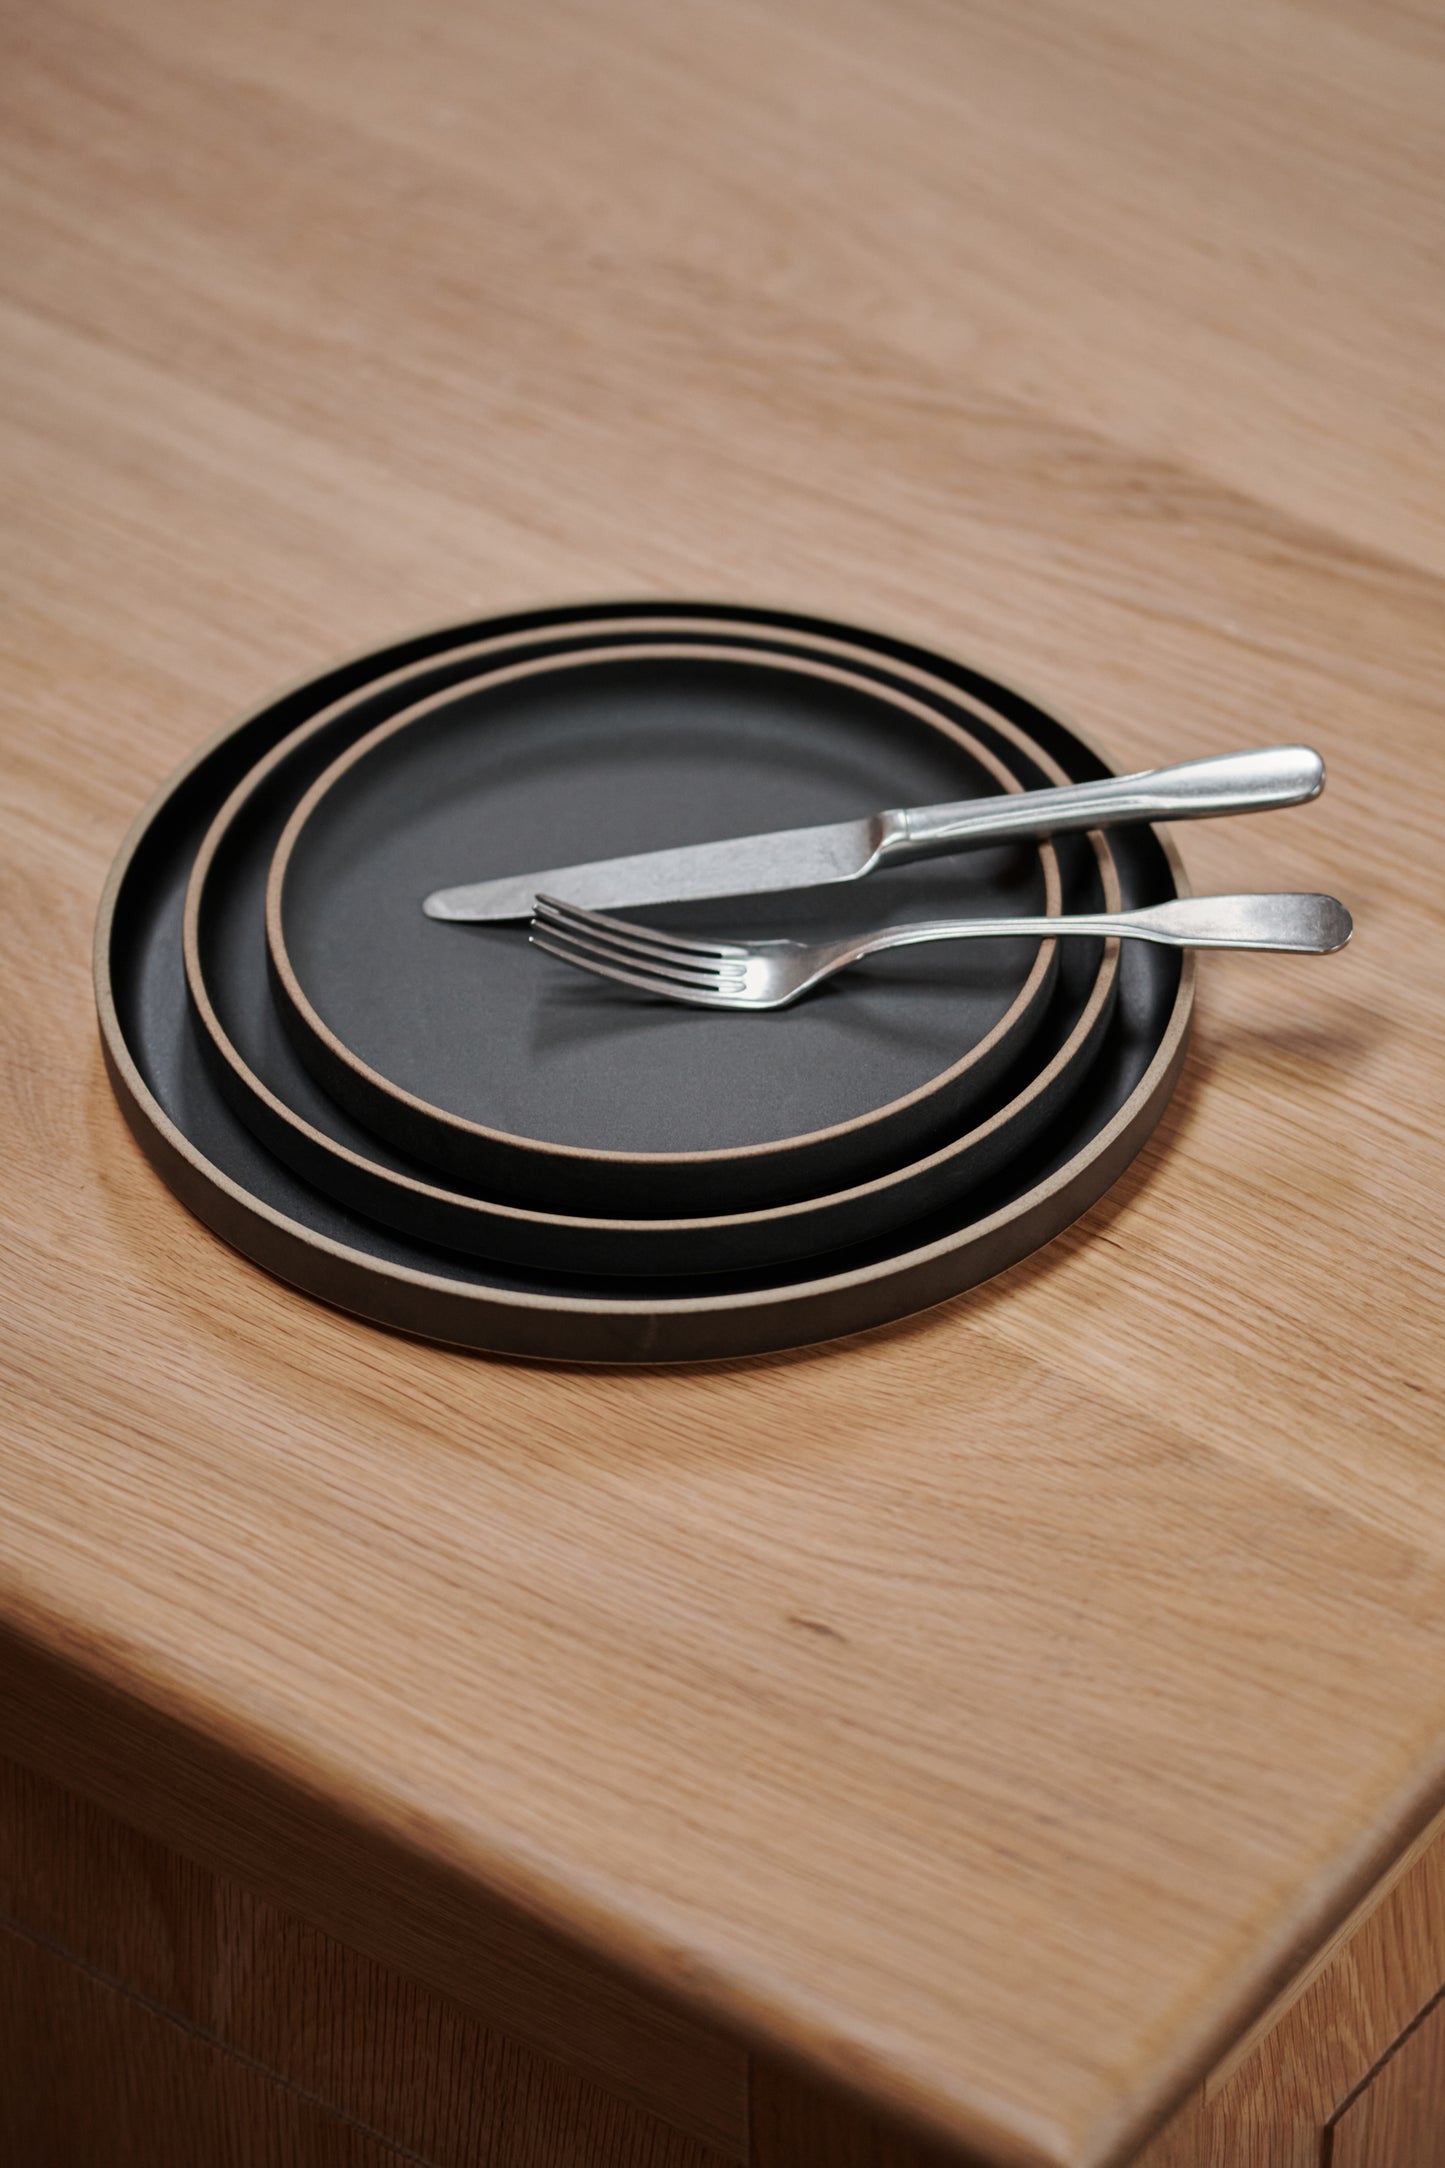 Black Ceramic Stackable Plates by Hasami Porcelain. Japanese style design, here seen with cutlery on a wooden table.